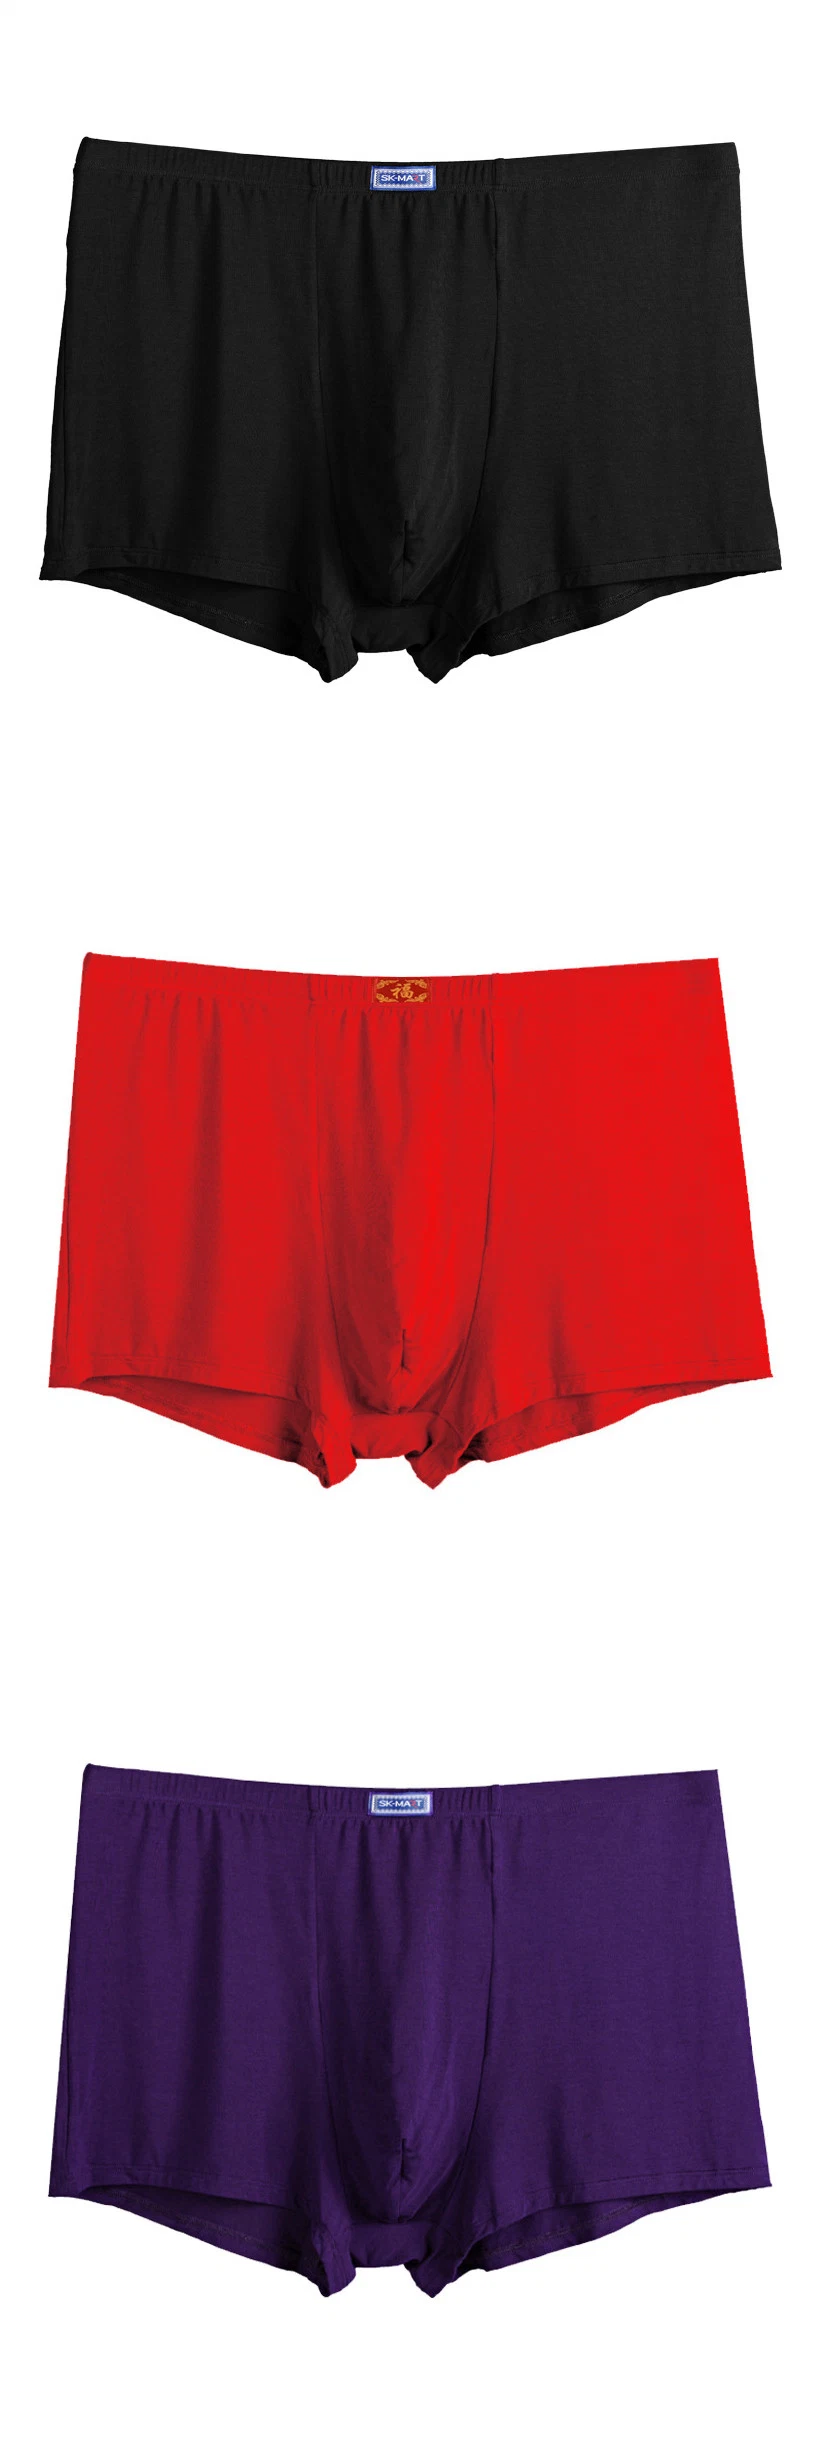 Custom Comfortable Boxer Shorts Briefs Bamboo Fabric Red Plus Size Underwear for Men